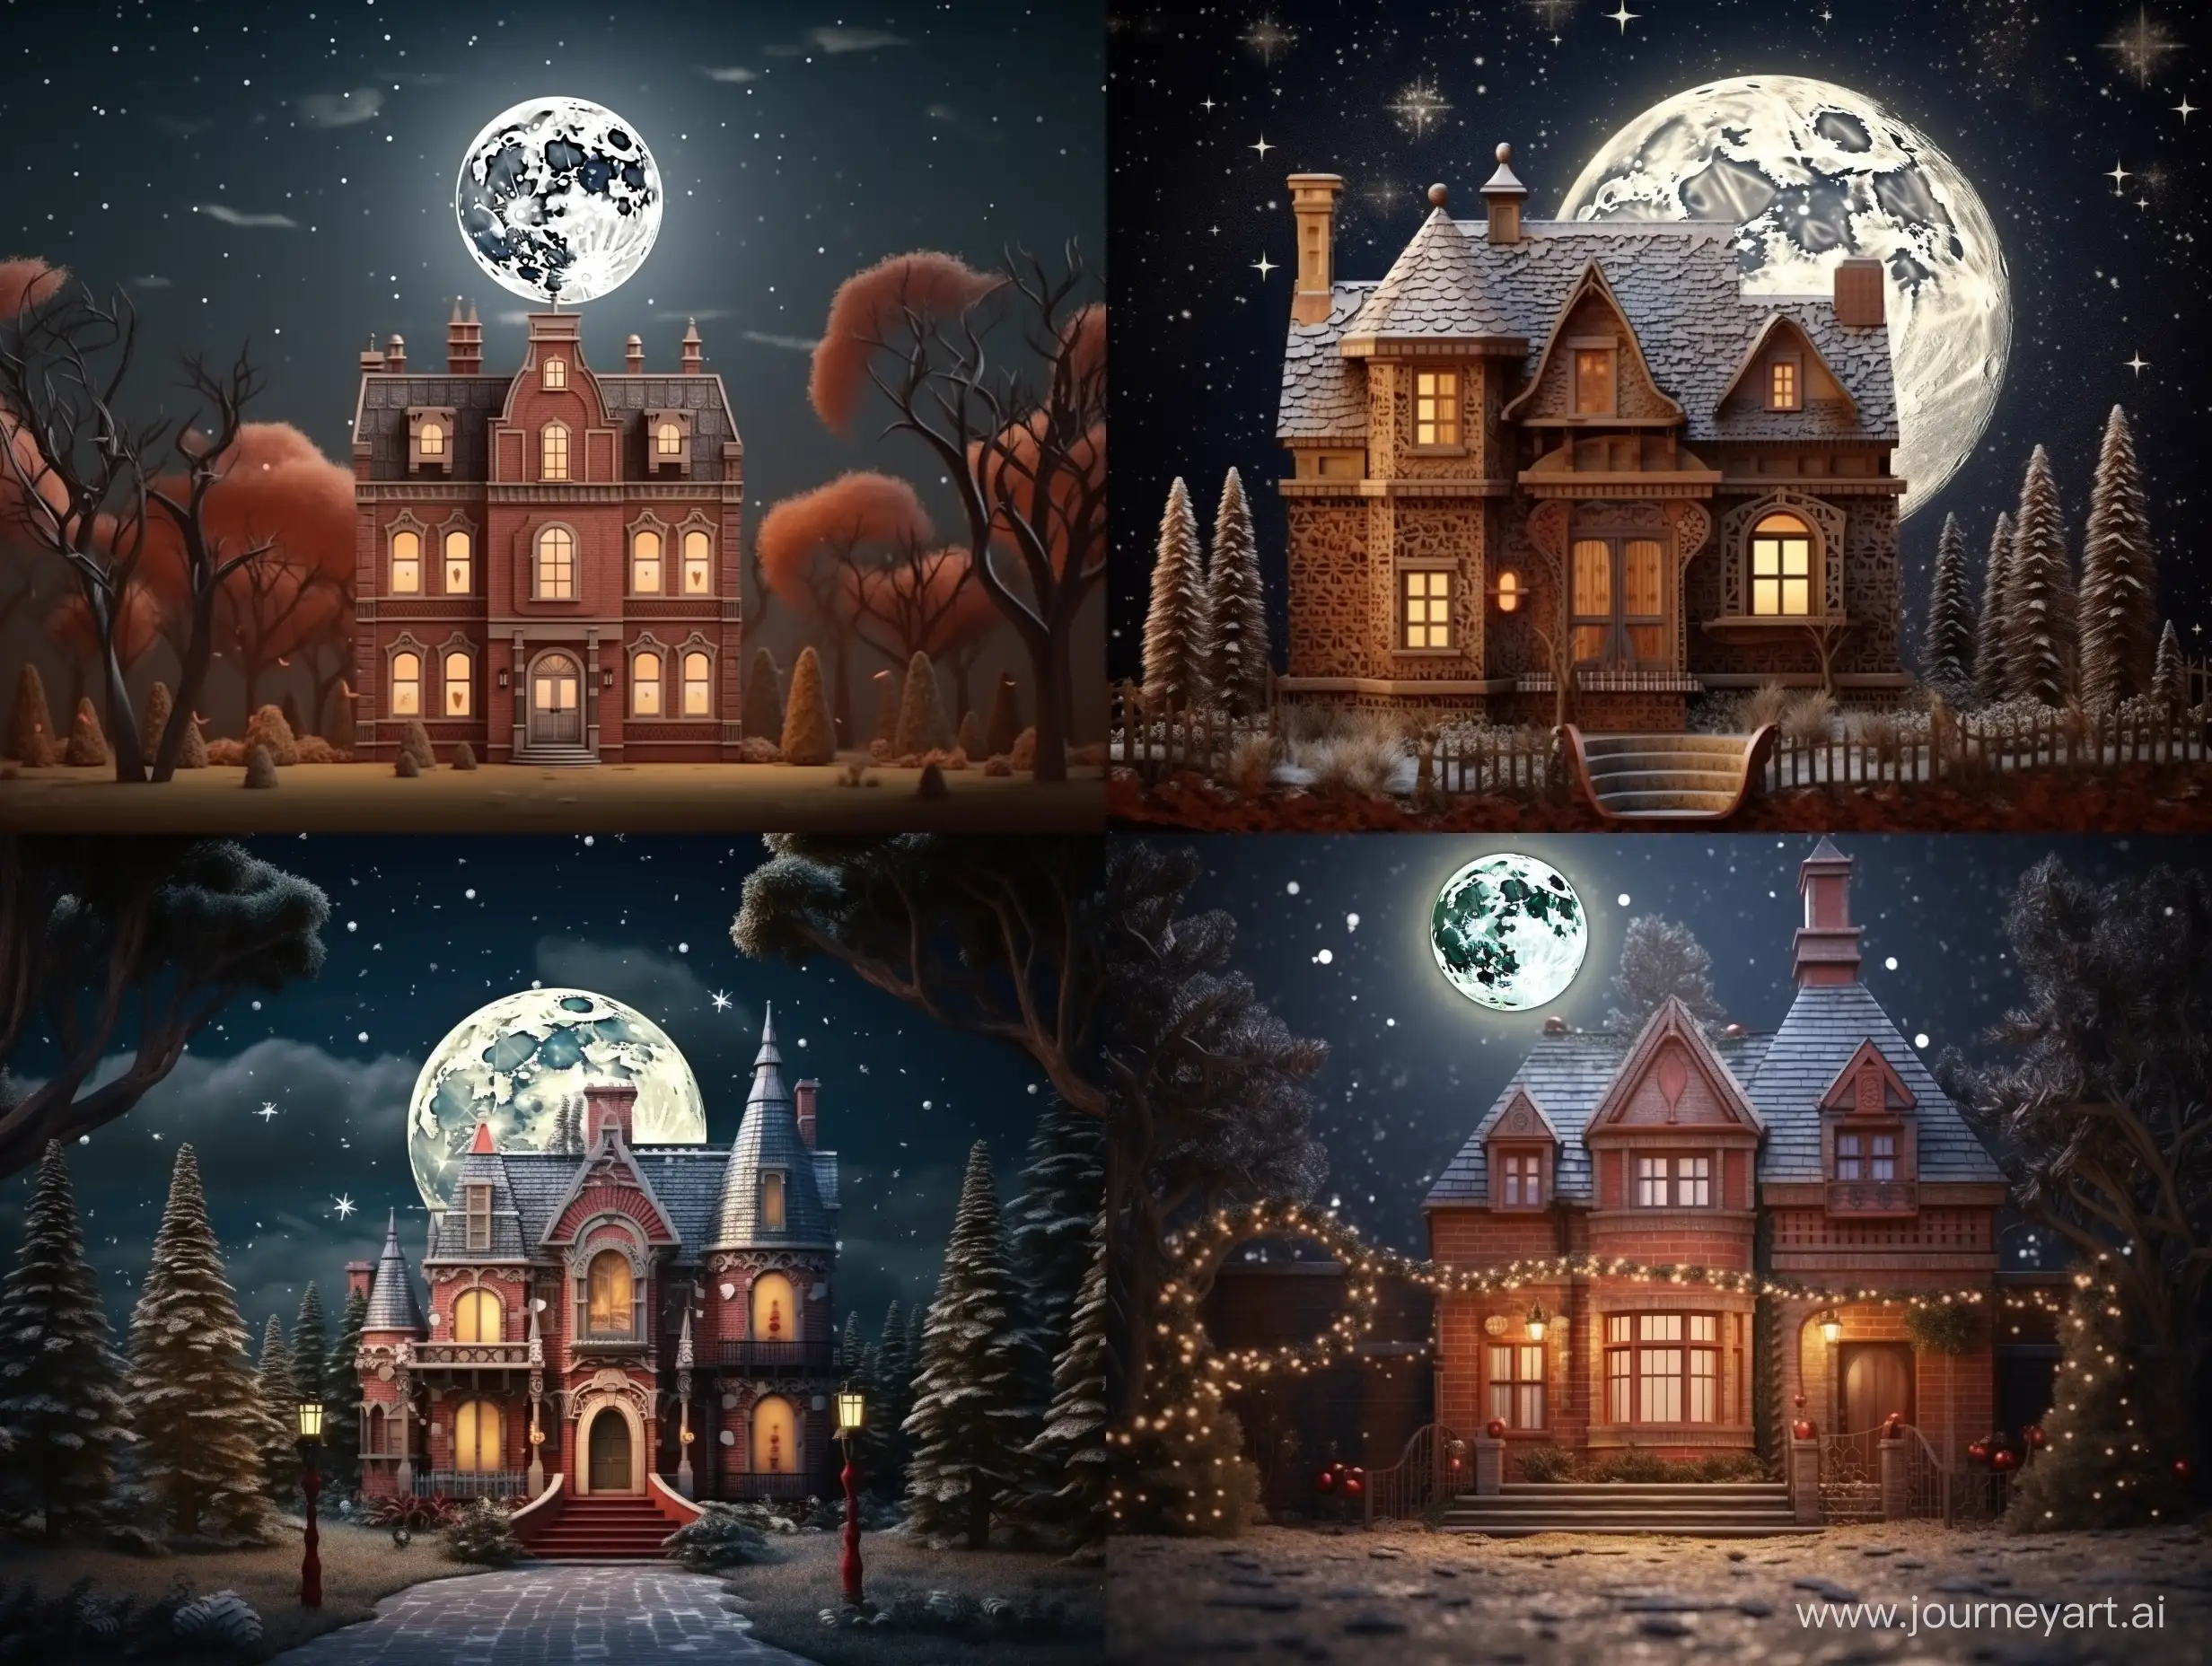 Charming-New-Years-Card-Moonlit-Brick-House-in-4K-Architectural-Splendor